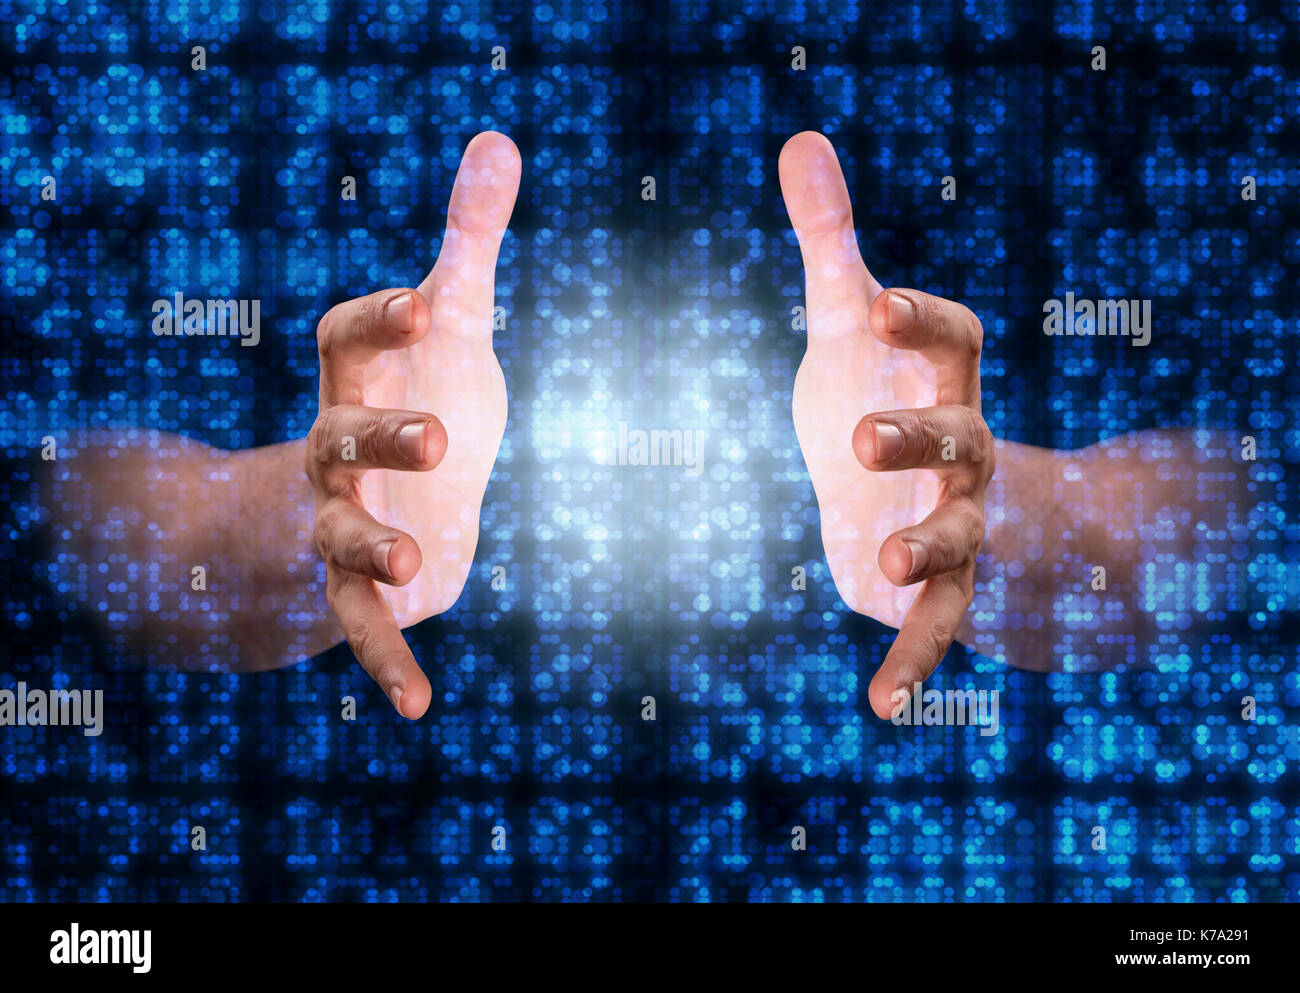 A pair of male hands reaching through digital numerical data figures grasping at something in the middle Stock Photo